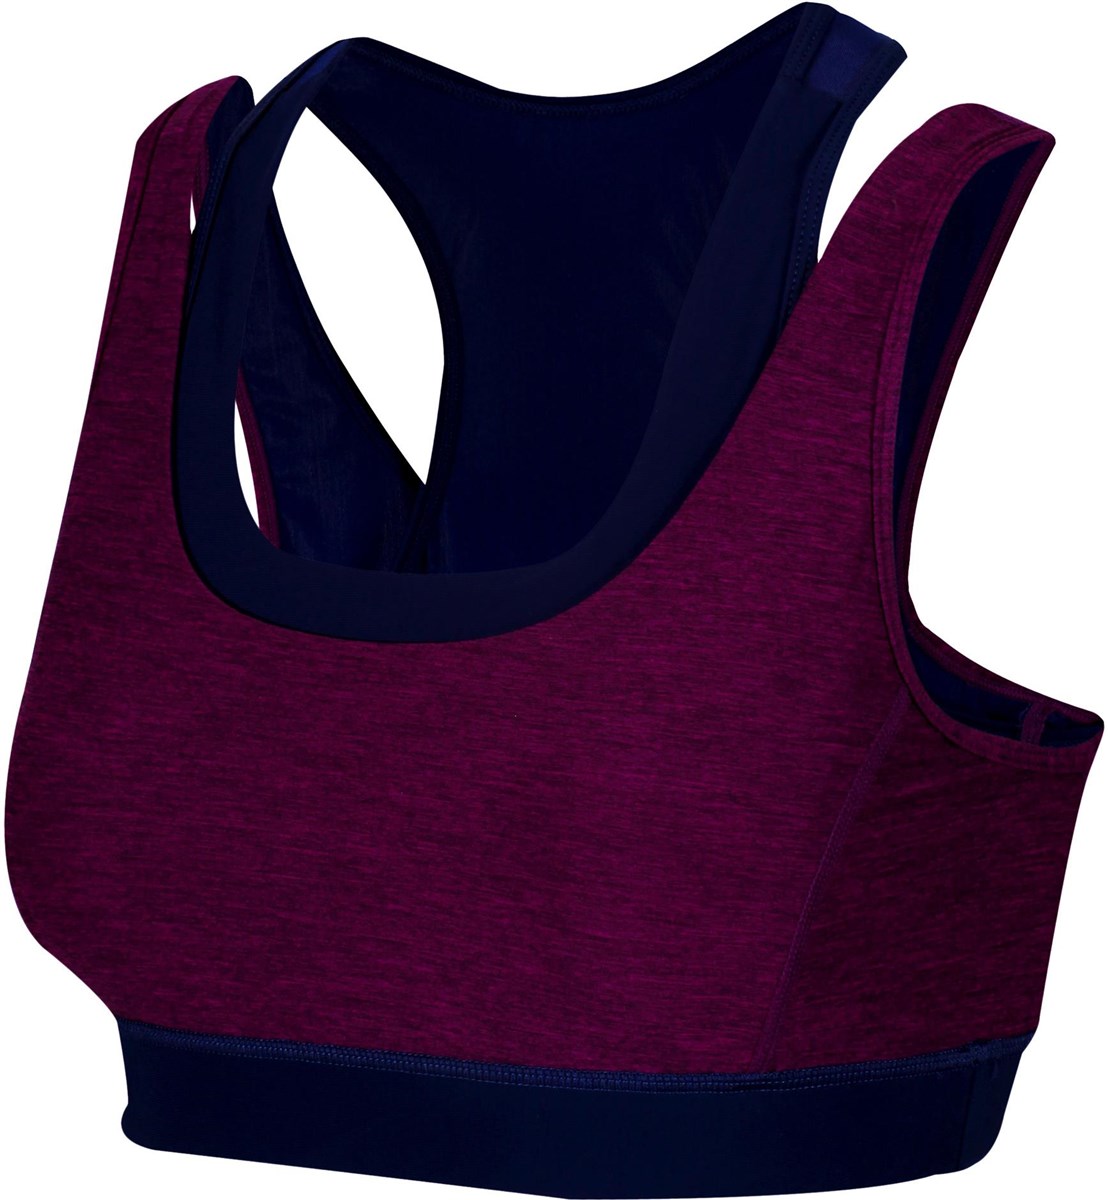 Zone3 Performance Culture Support Sports Bra product image